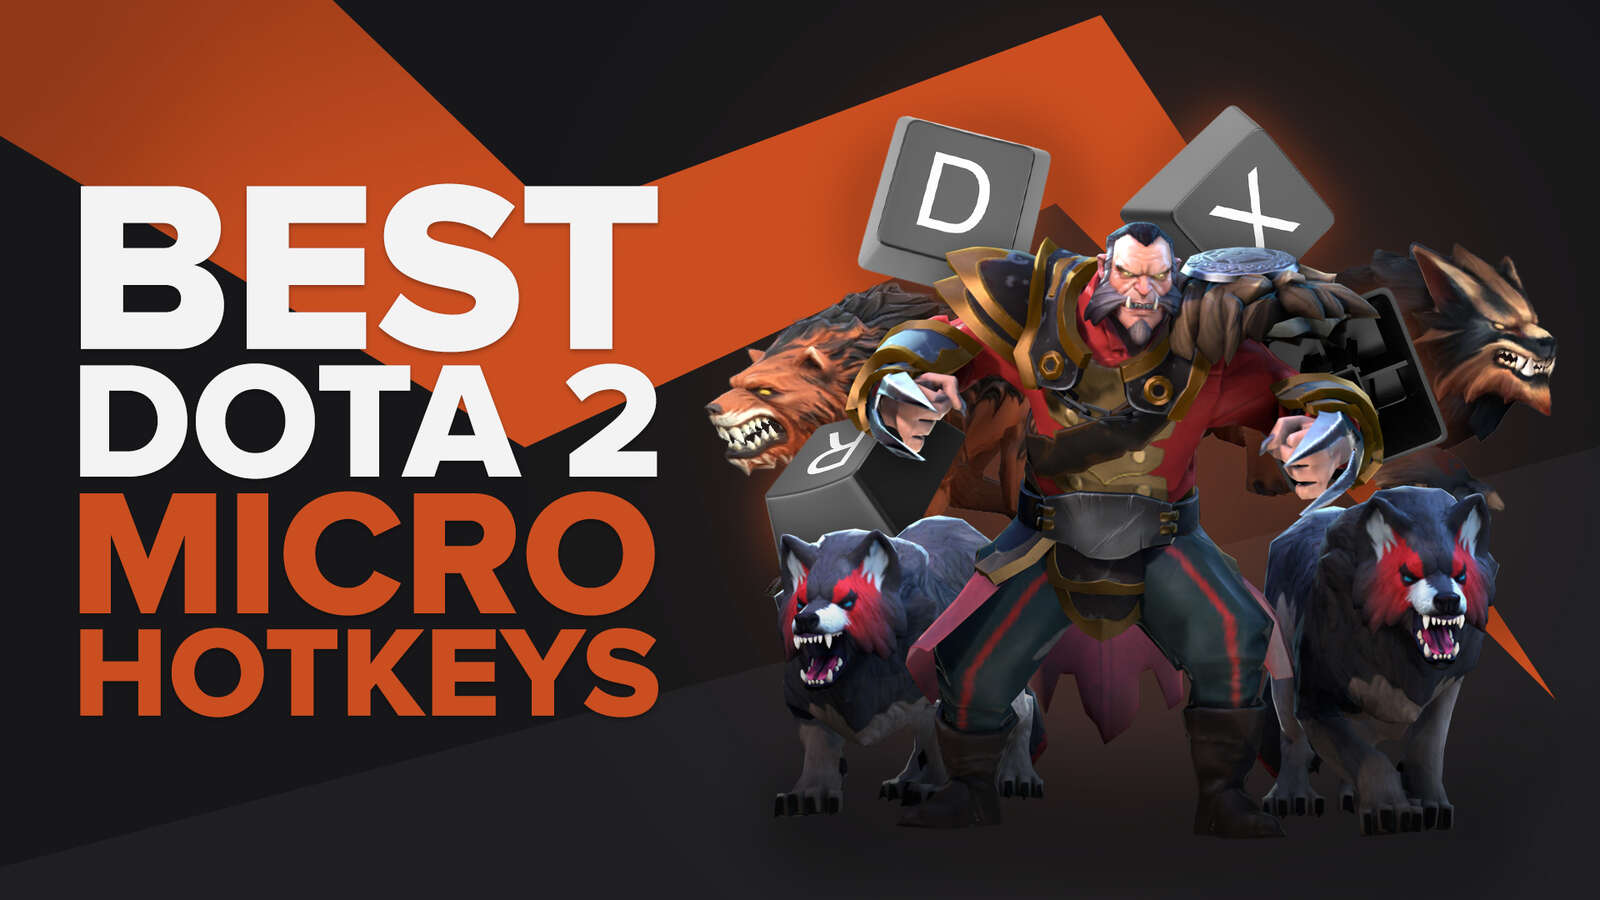 What Are The Best Dota 2 Micro Hotkeys?